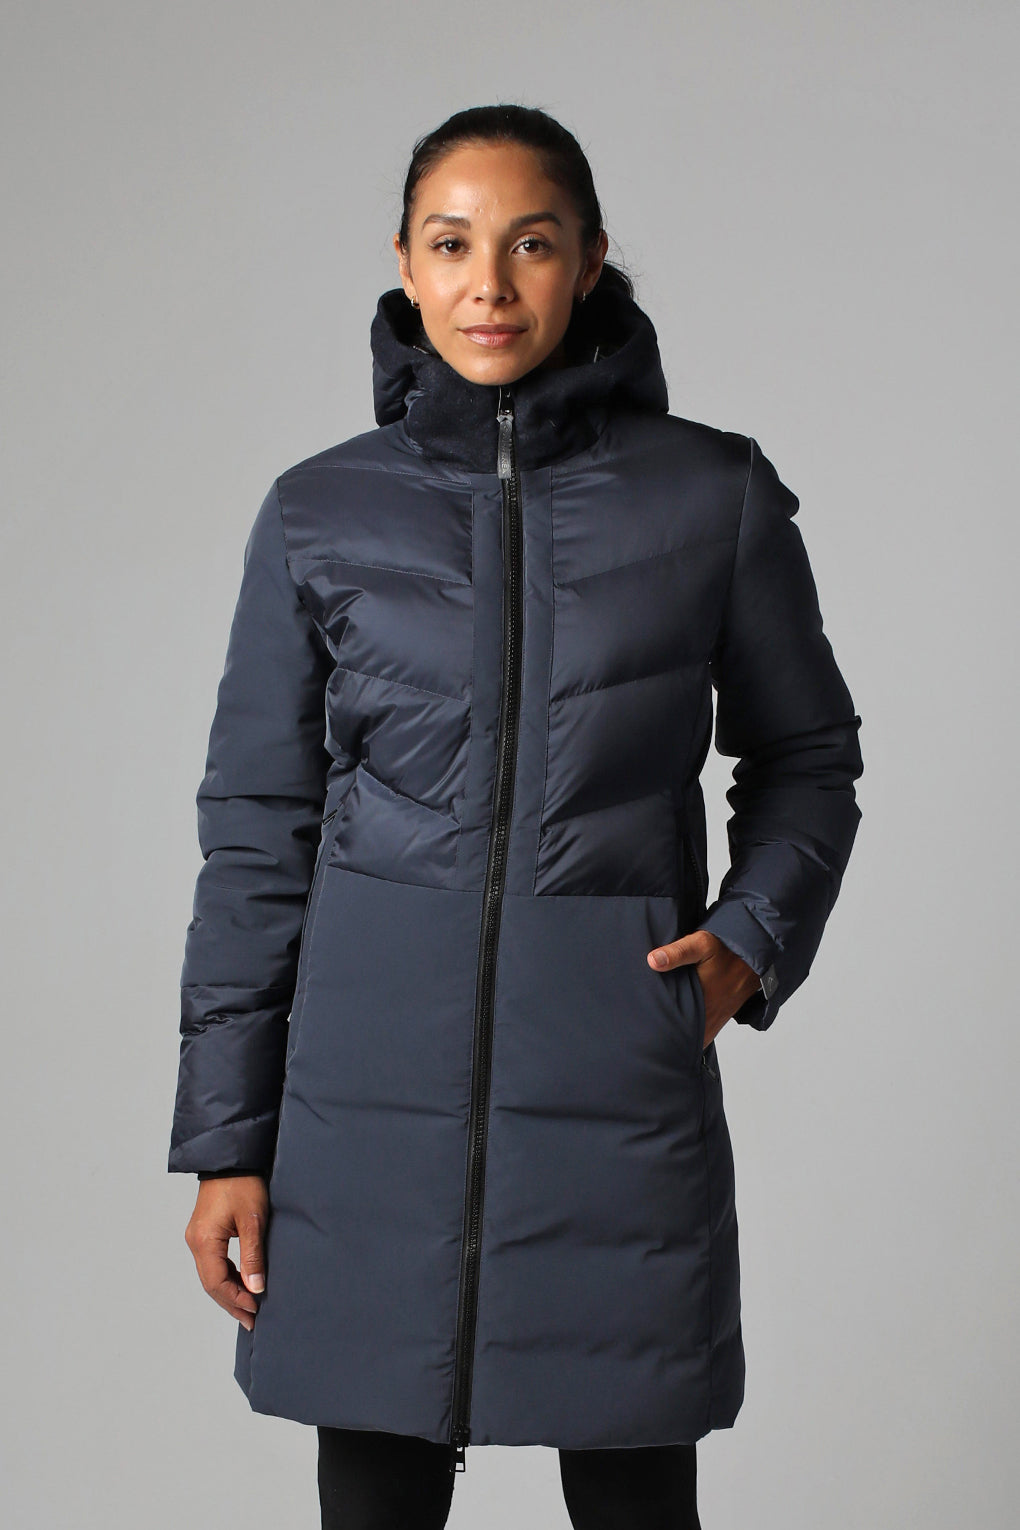 Perfect Moment Supernova Quilted Logo Puffer Coat